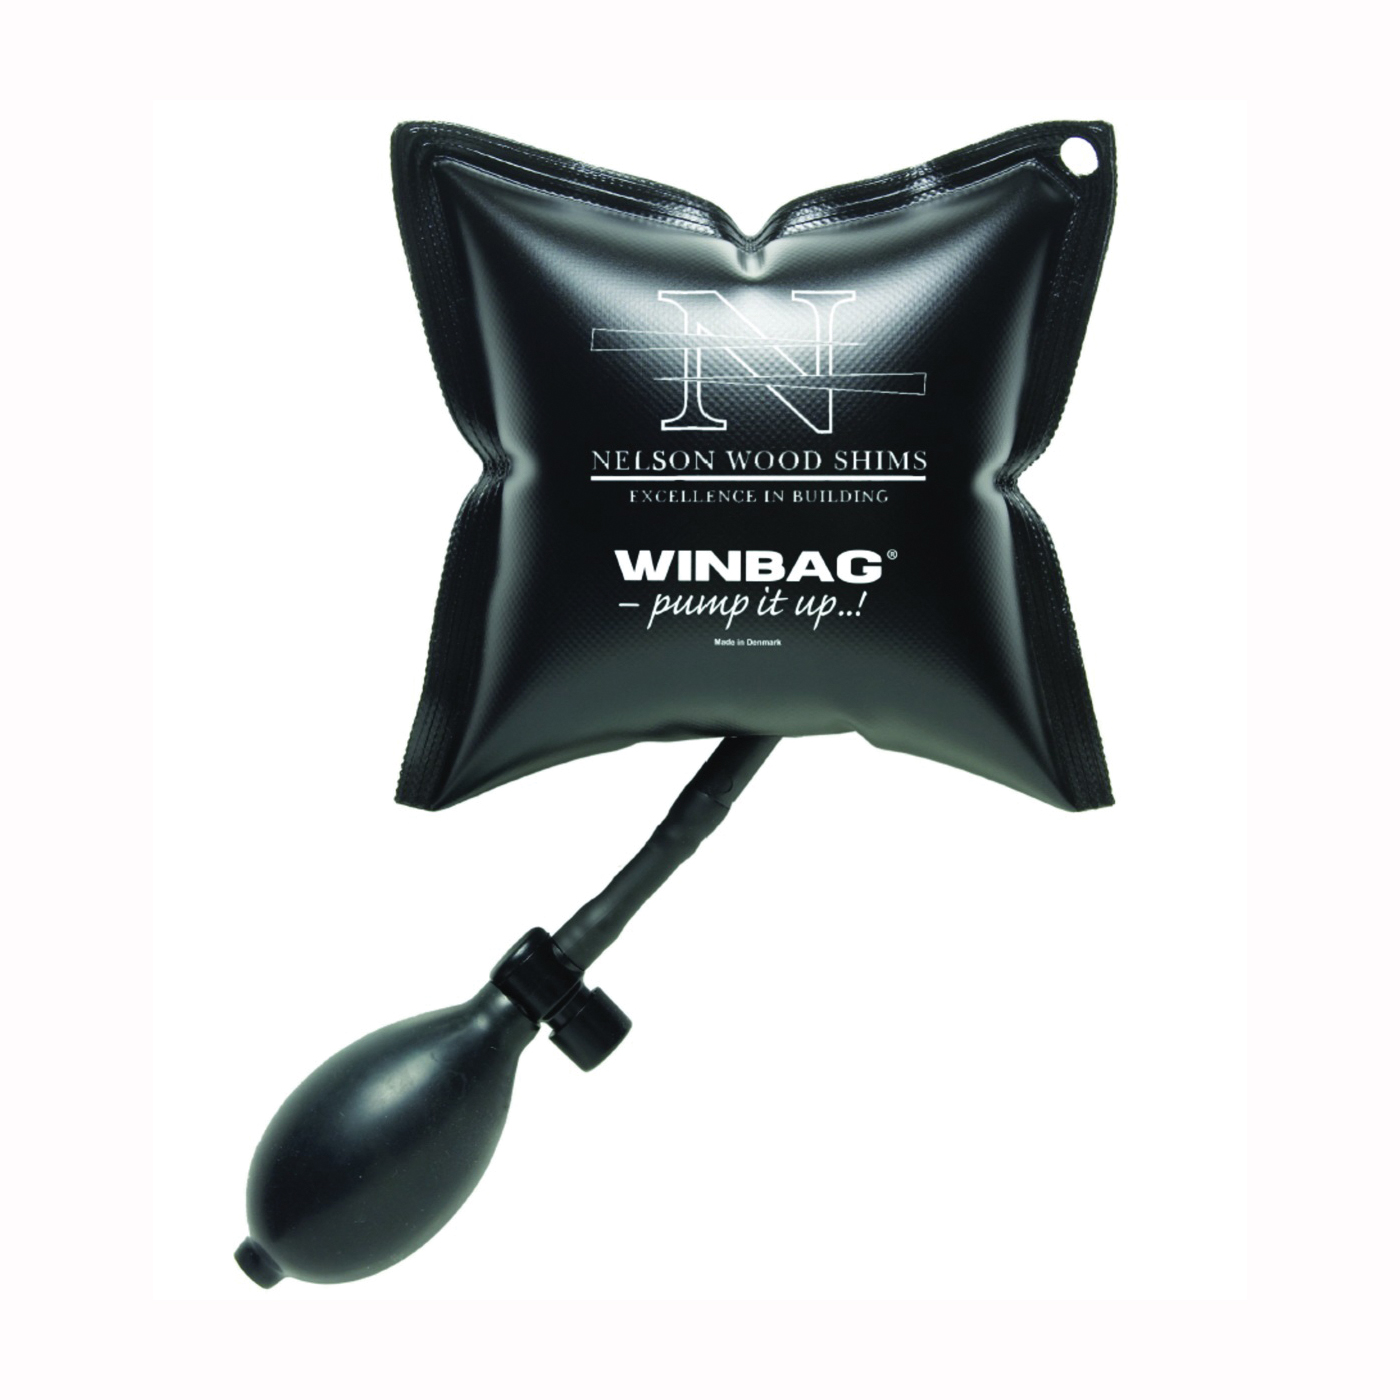 Nelson WB20 Shimming Inflatable Winbag, Specifications: 220 lb Load Capacity - 1